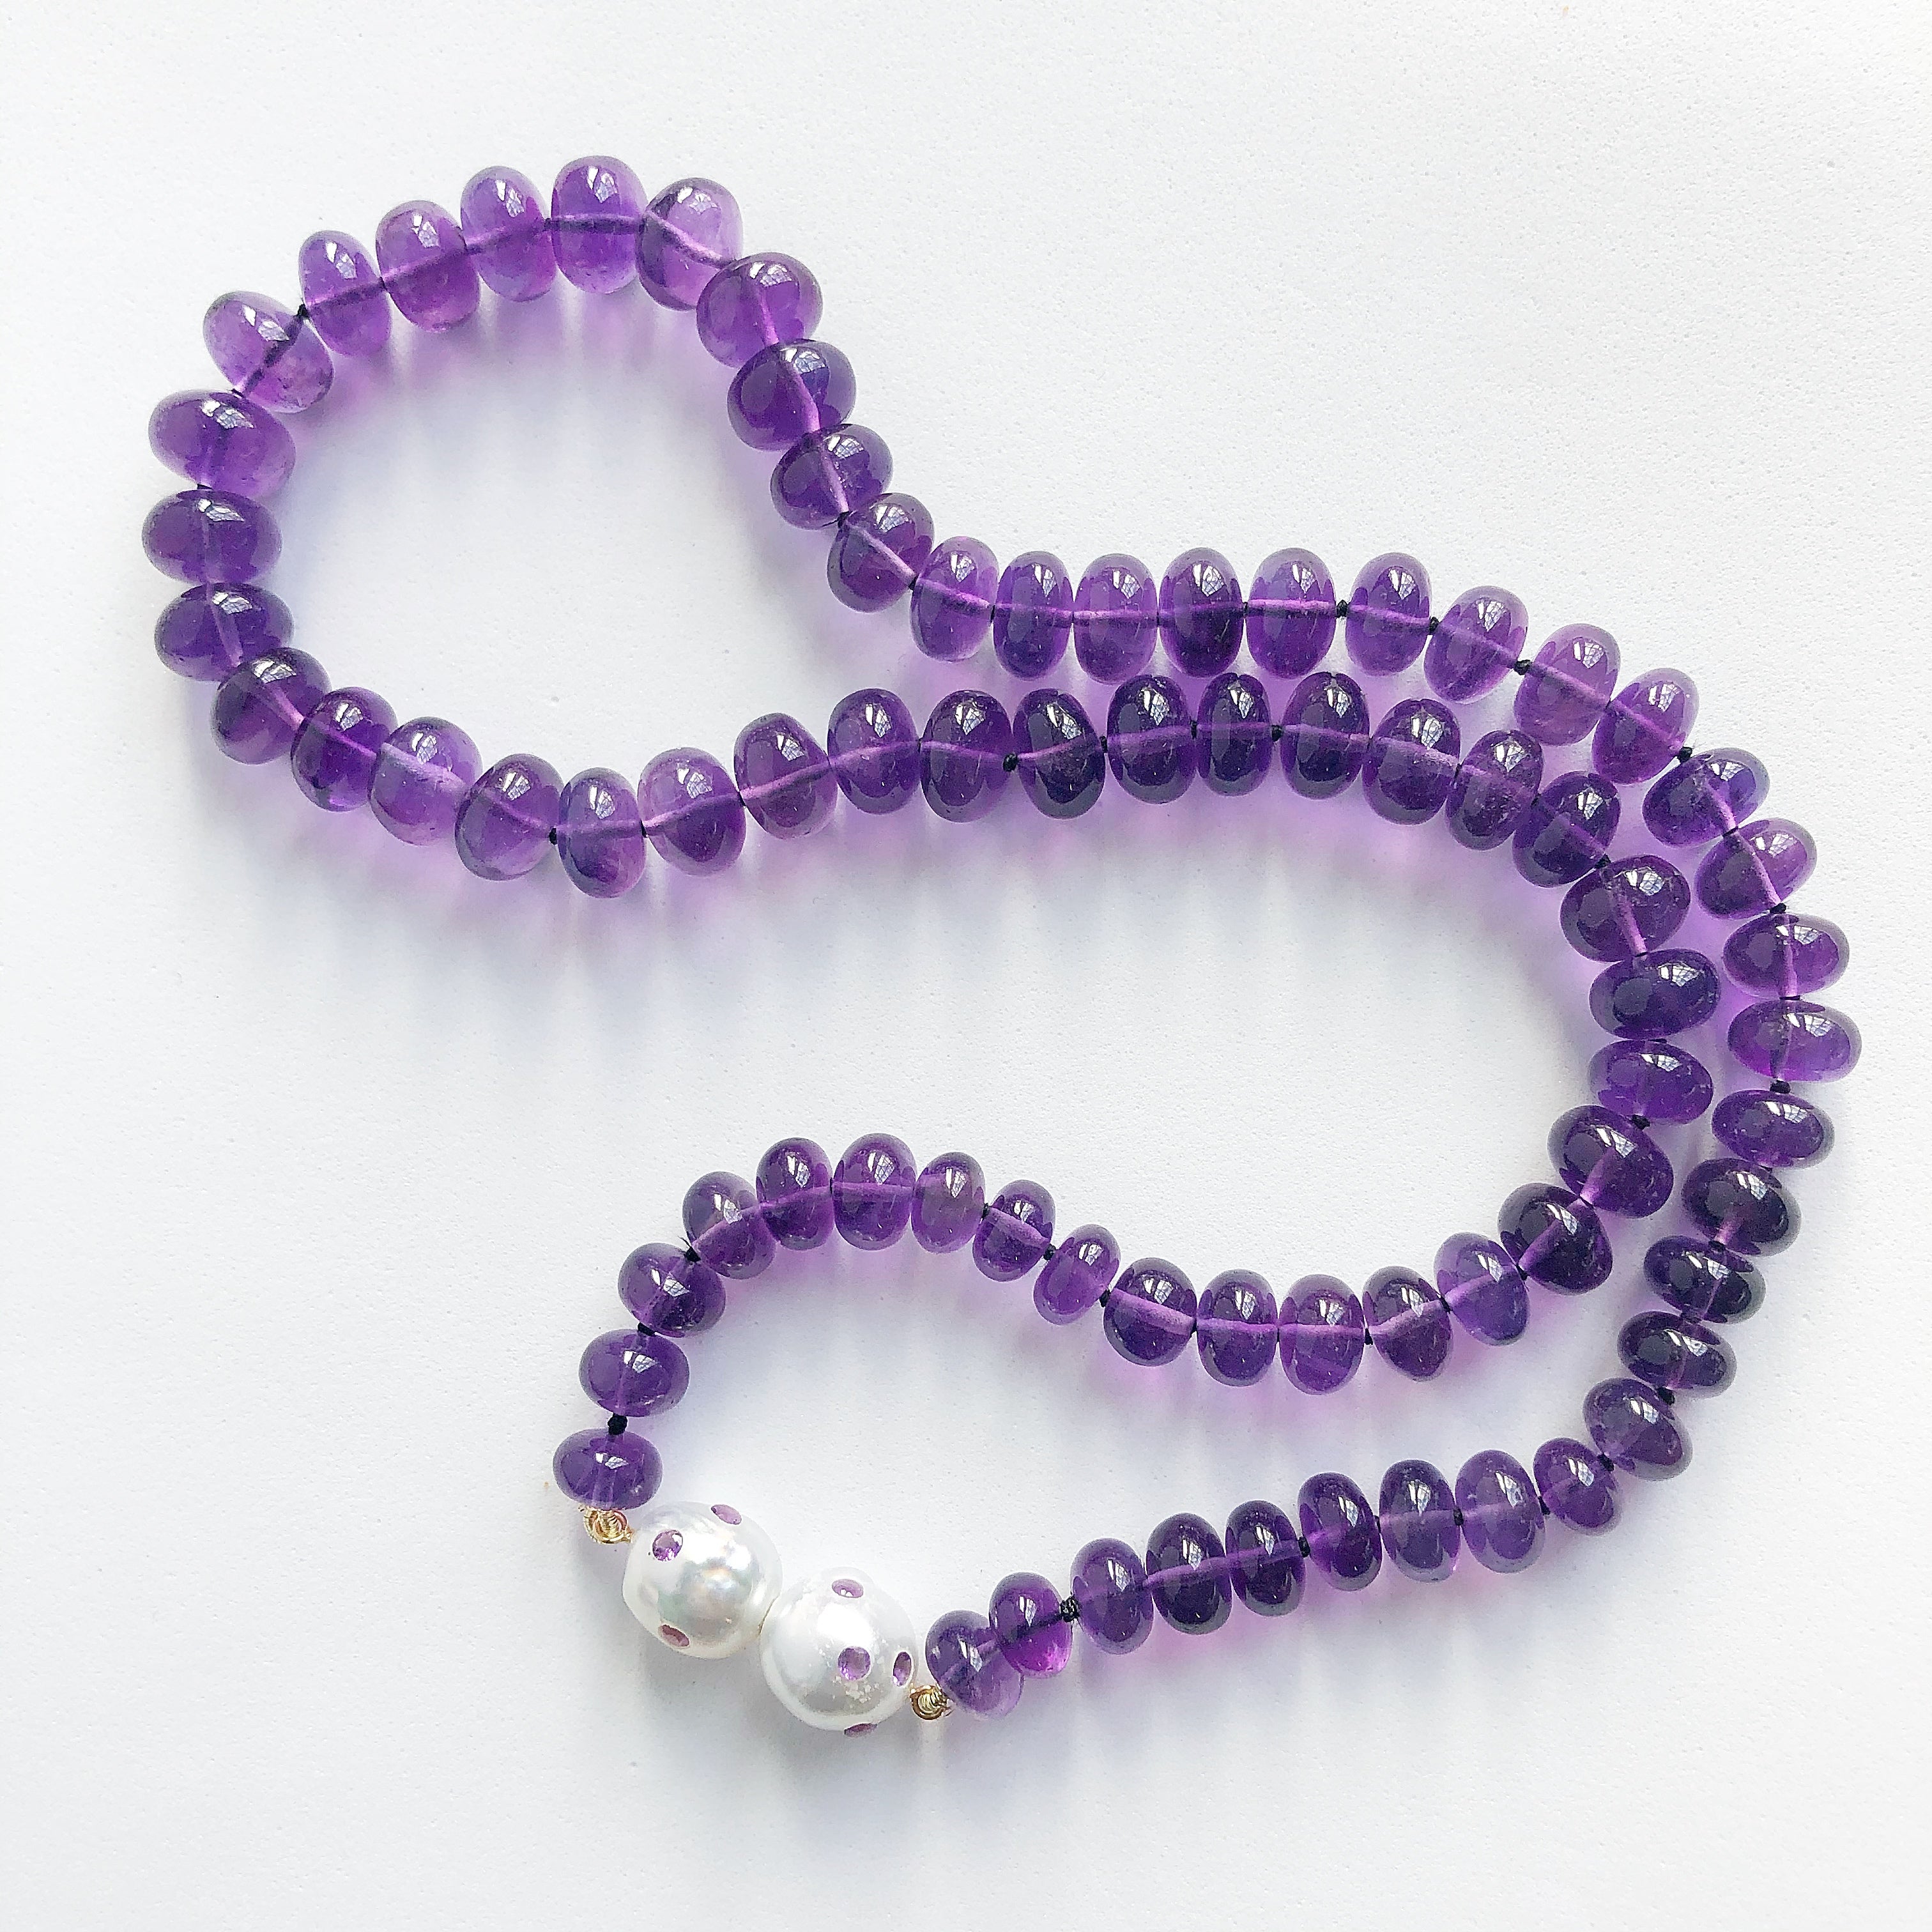 White Baroque South Sea Pearls and Amethyst Gemstone Clasp on an Amet –  Judi McCormick Jewelry